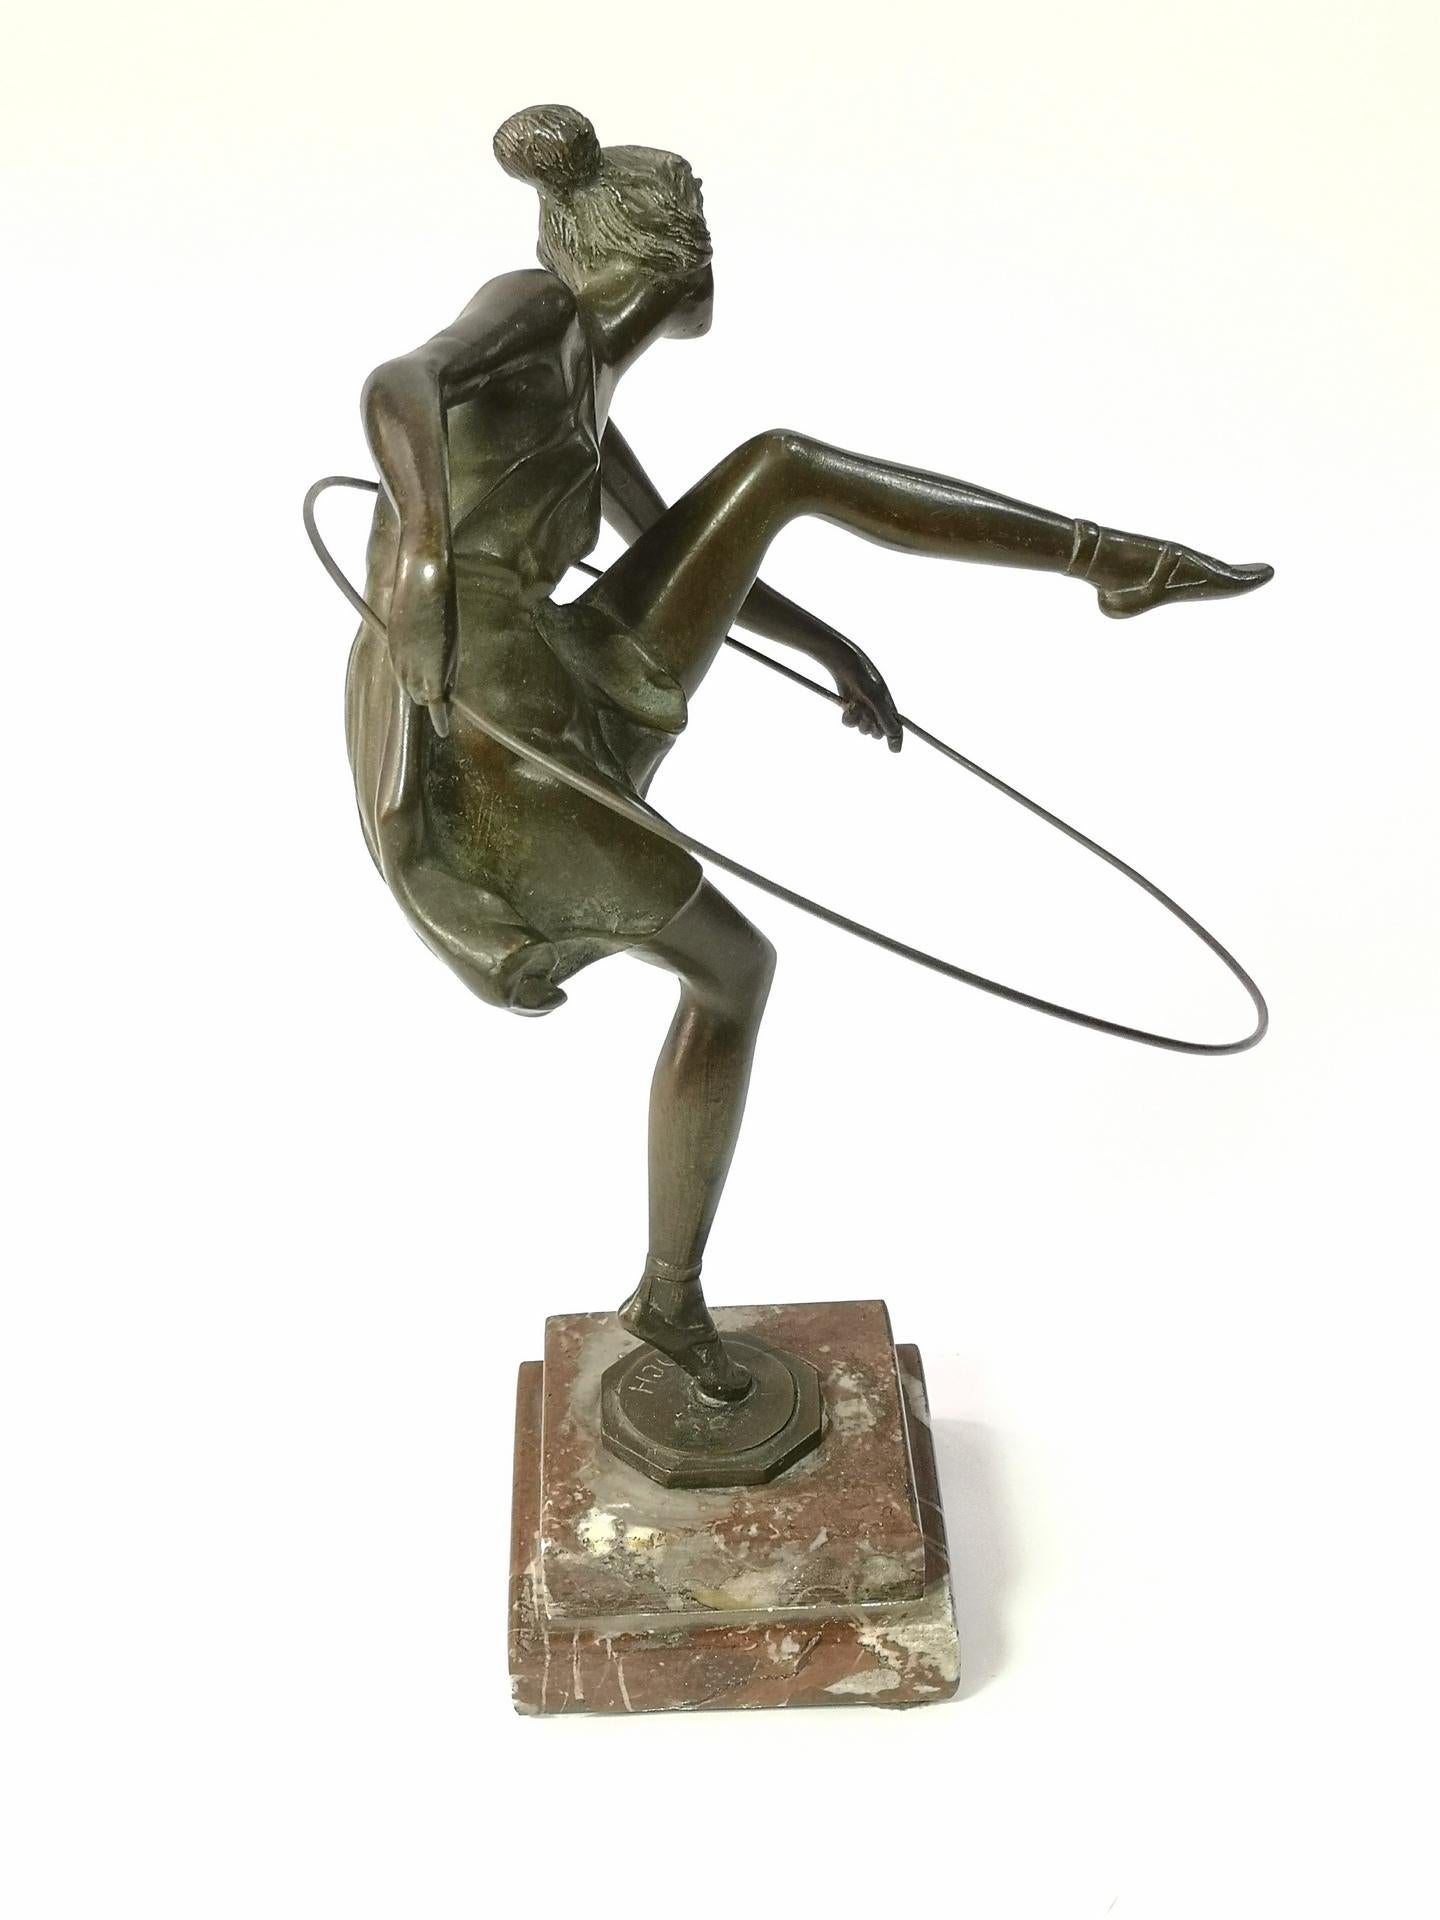 Early 20th Century Art Deco Dancer with Hoop by Bruno Zach, Bronze on Marble Sculpture, ca 1925